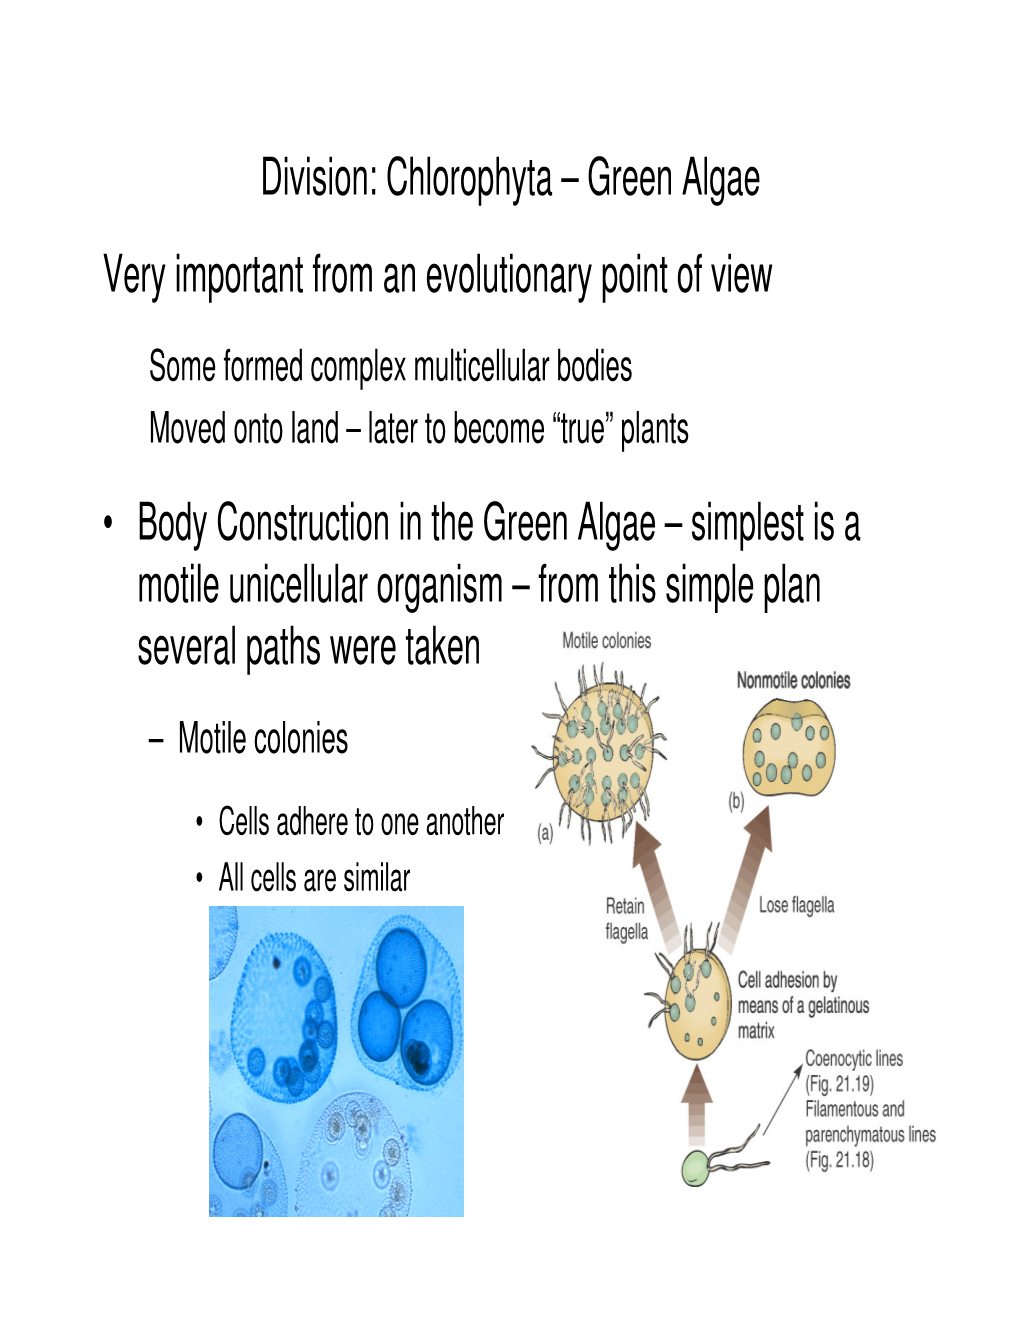 Division: Chlorophyta – Green Algae Very Important from an Evolutionary